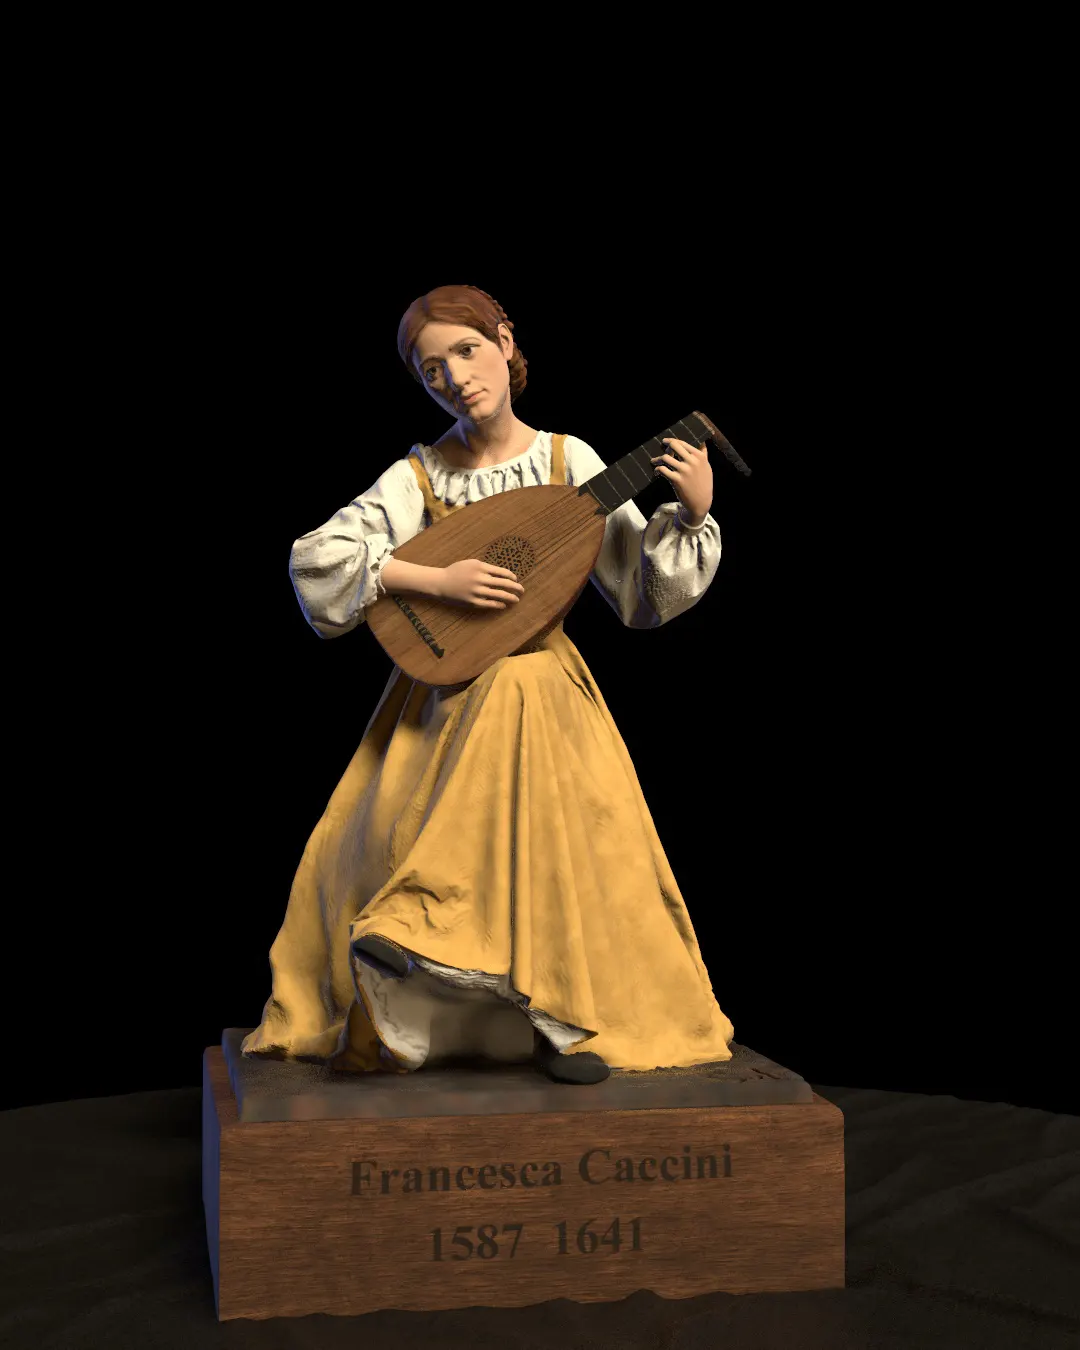 Francesca-Caccini-statue/Rendering-of-Francesca-Caccini-statue-modeled-by-Emil-Sole-5.webp